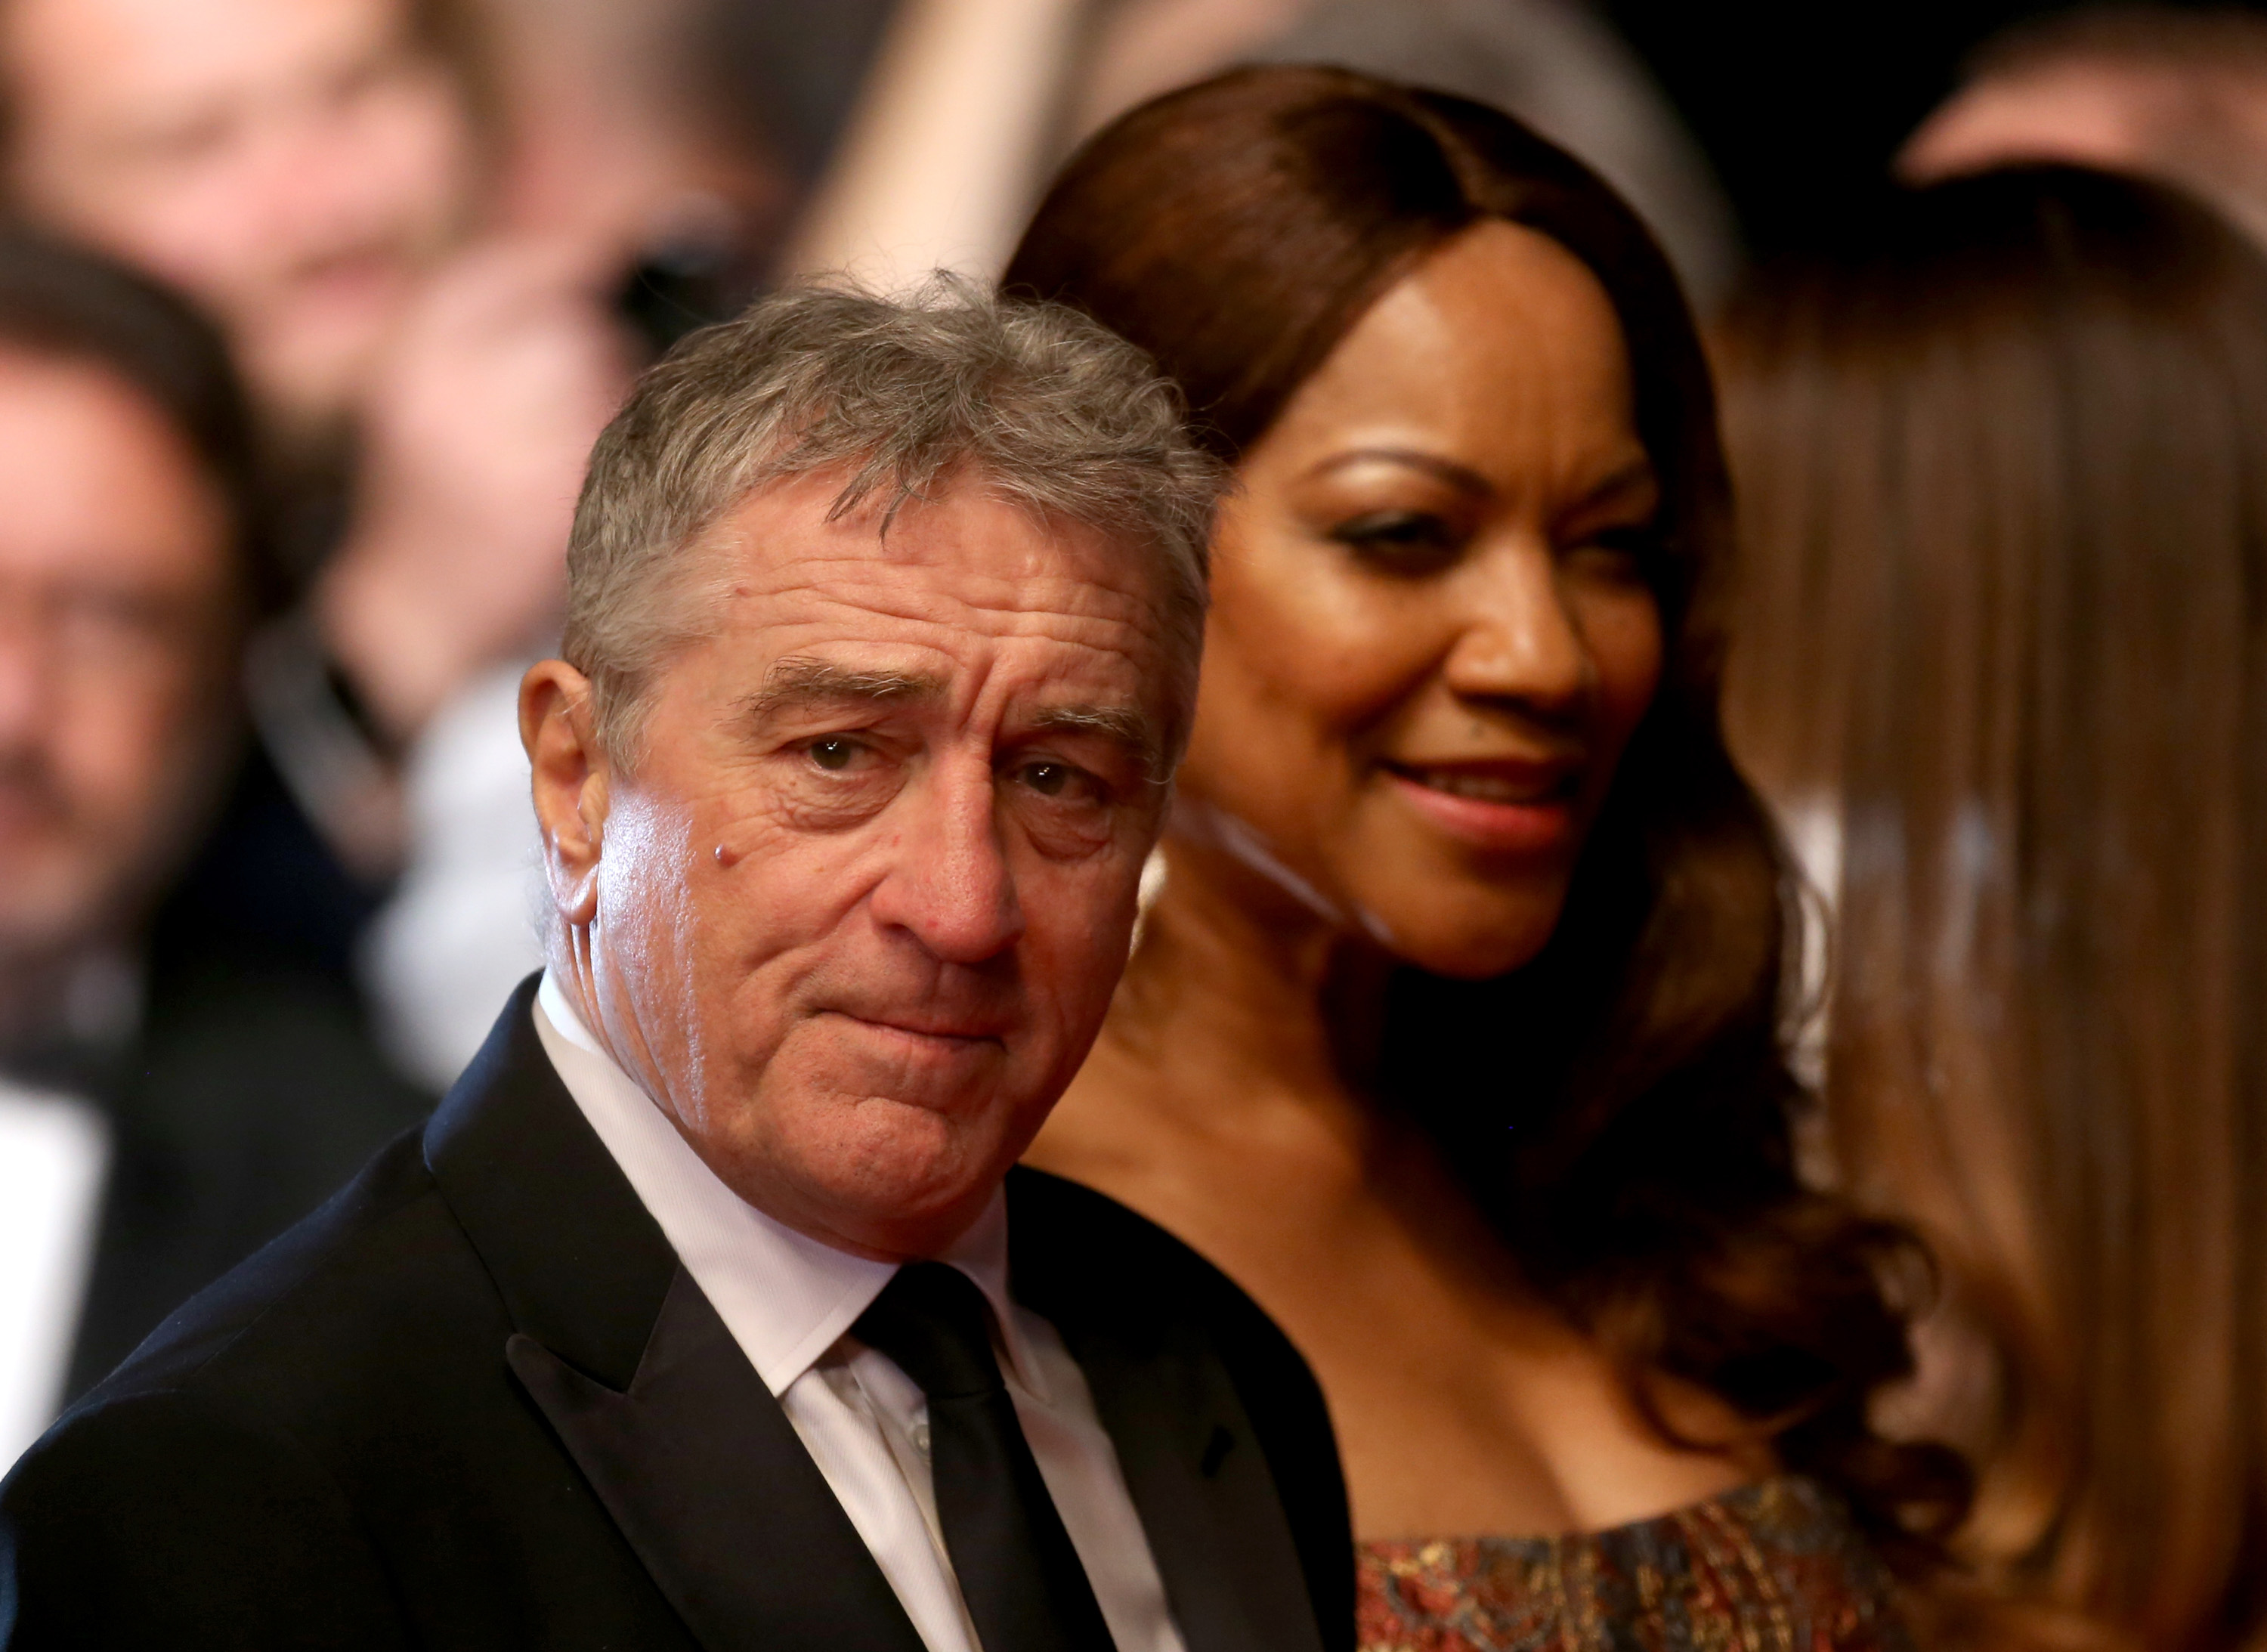 Robert de Niro and  Grace Hightower in France in 2016 | Source: Getty Images